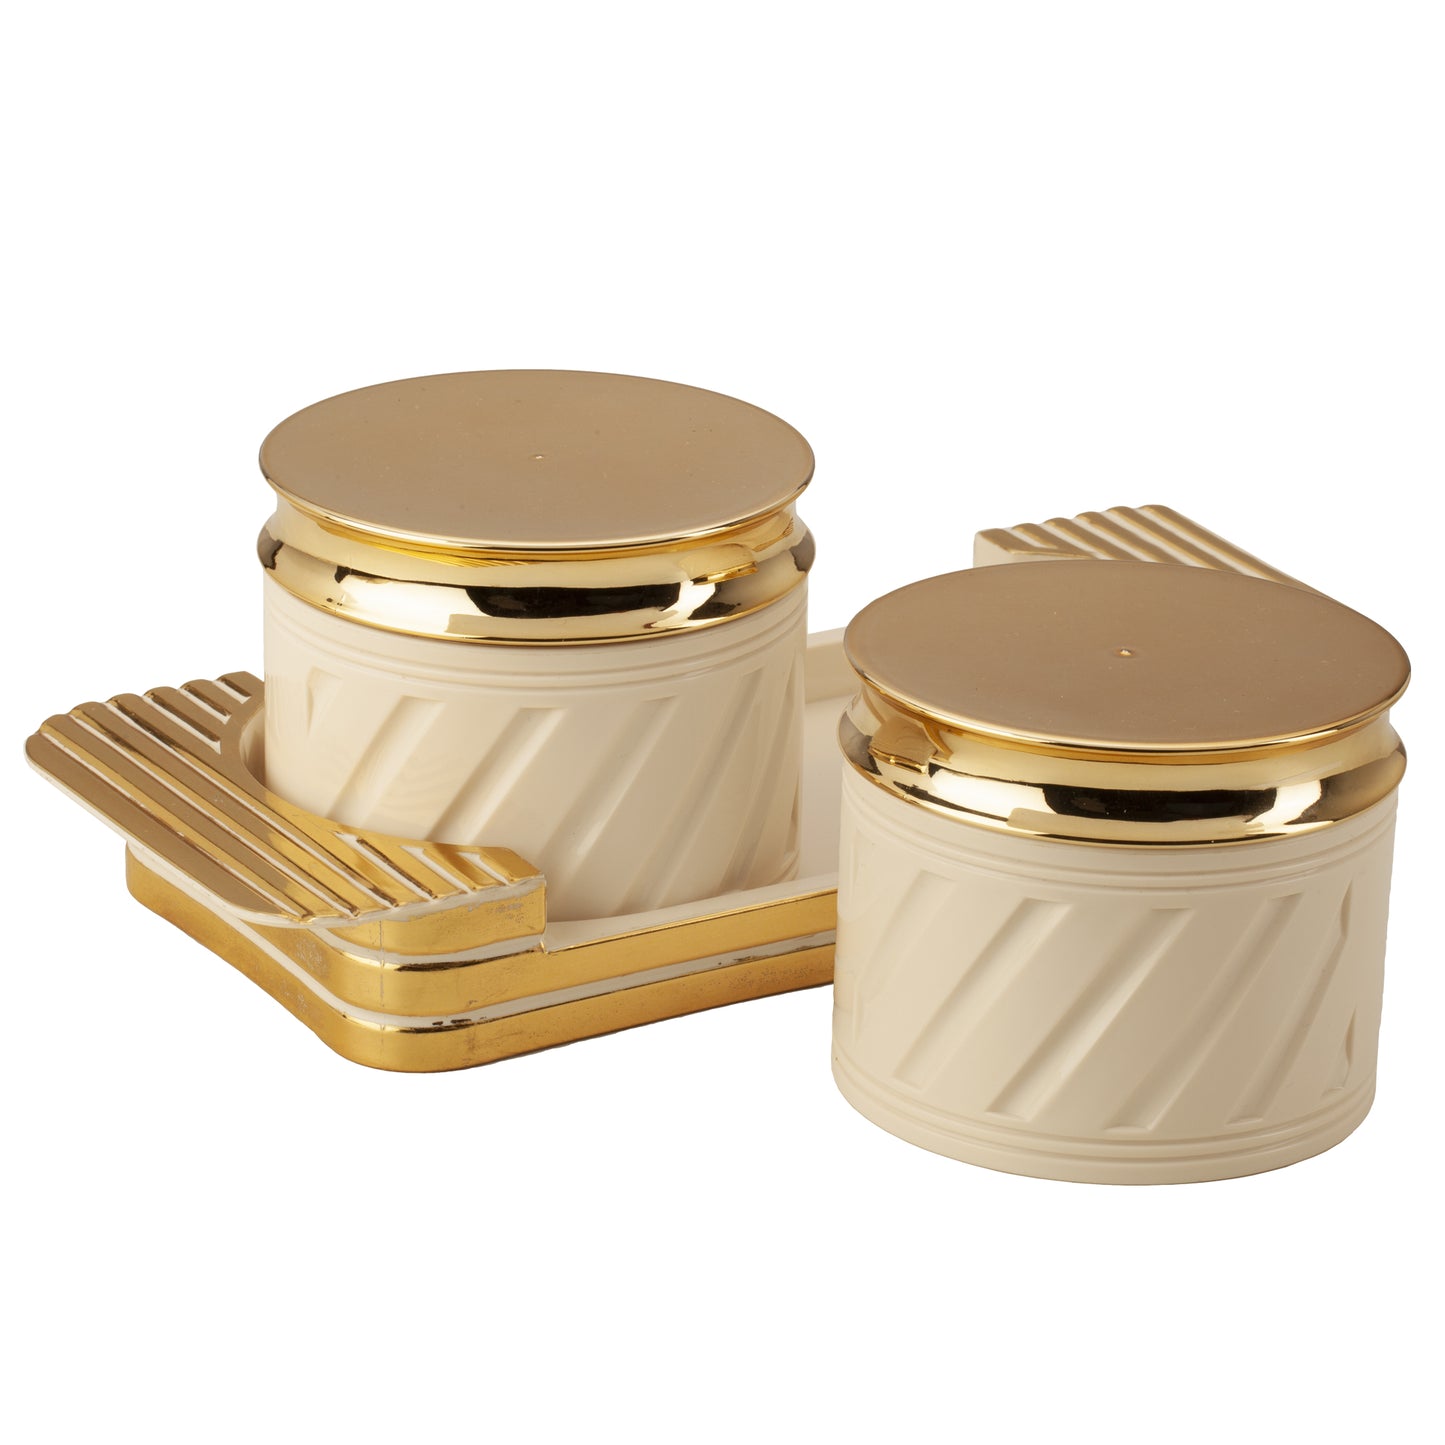 Elegance Container set of 2